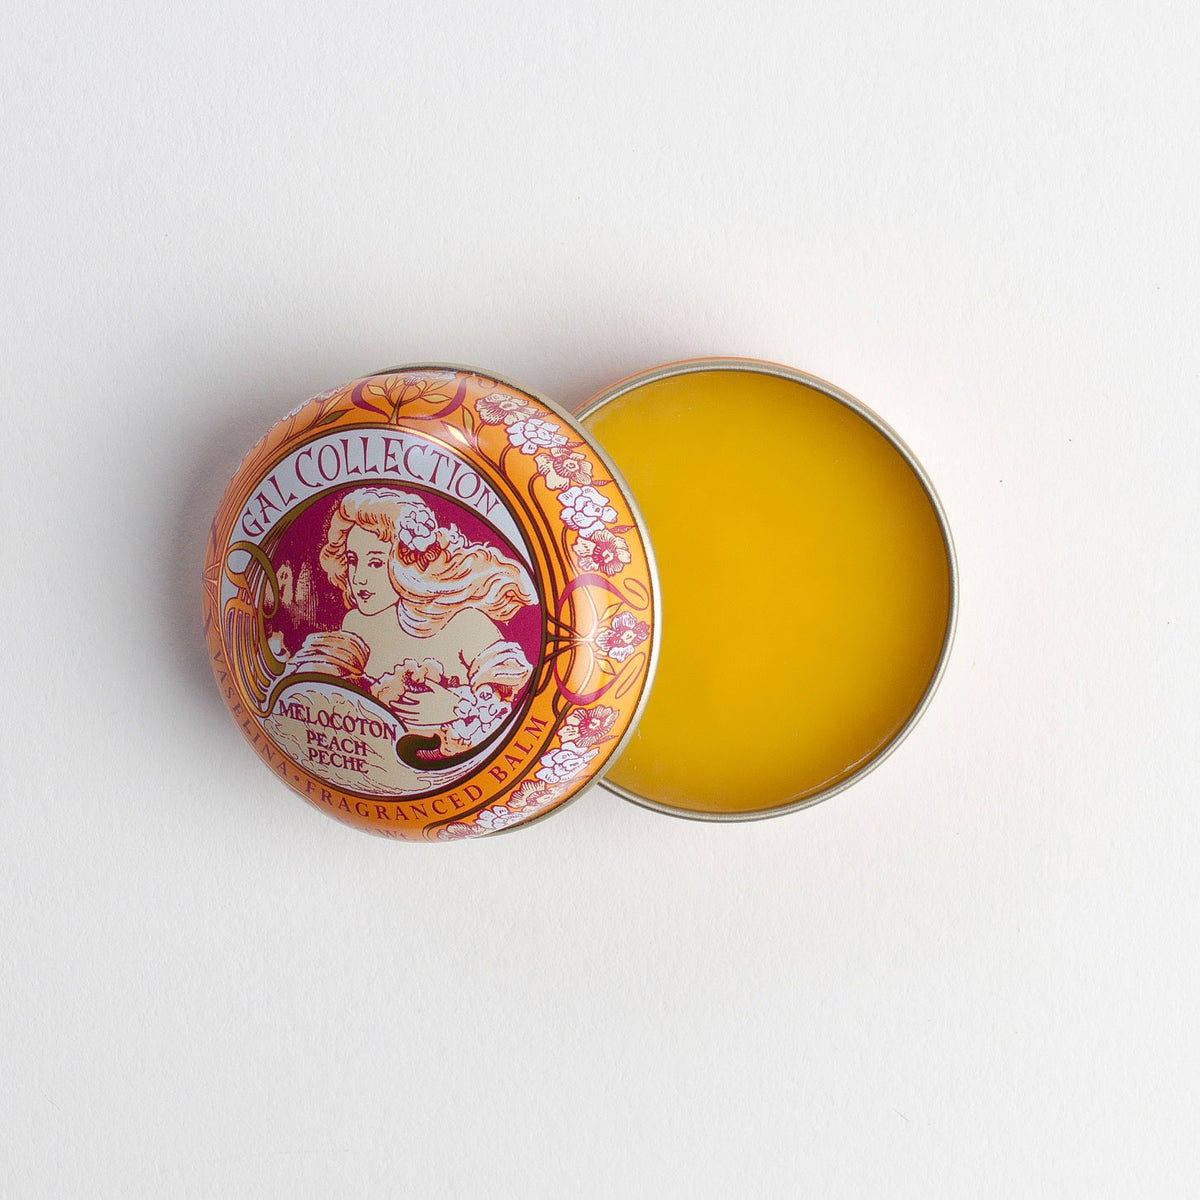 An open round tin of Perfumeria Gal Madrid fragranced lip balm in peach displaying a vintage floral design on the lid, with visible yellow-colored perfume inside against a white background.